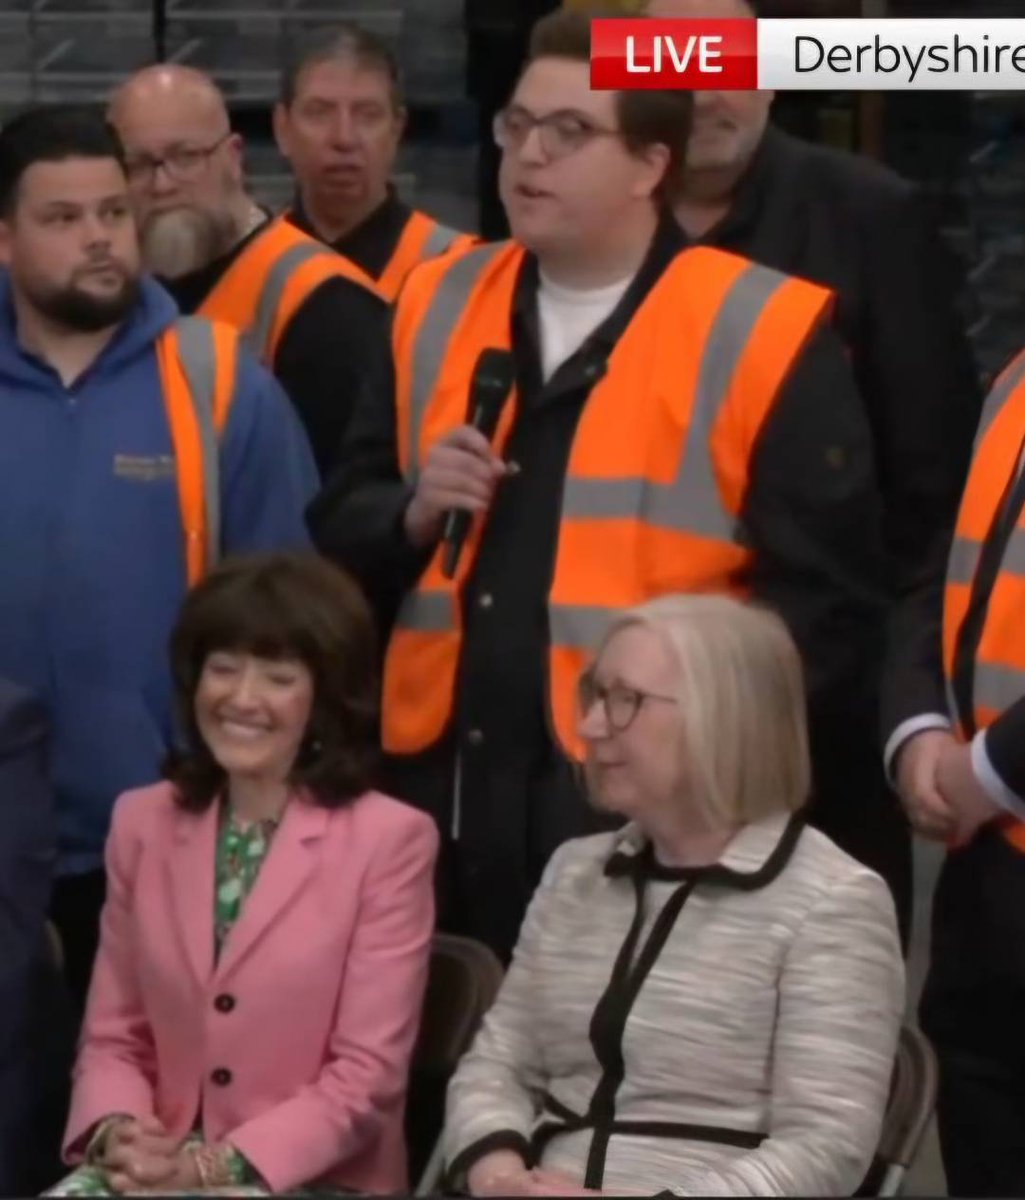 The man holding the microphone was 'randomly' chosen by @RishiSunak to ask a question while Sunak visited @McVities . This man was in fact a Tory councillor. They just can't fucking help themselves can they.